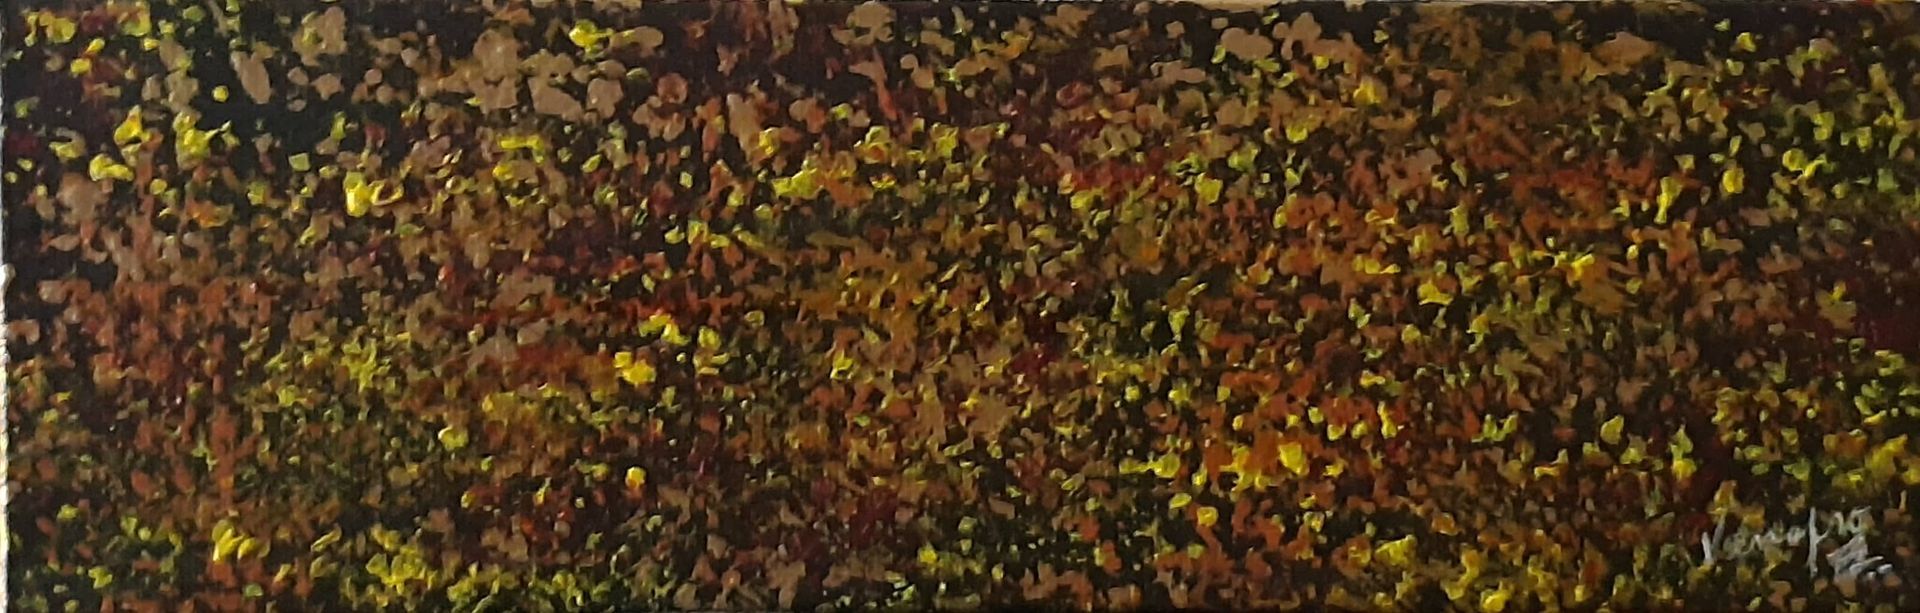 #A-14 Abstract 9 in. x 3 in. oil on Canvas Board. On a black gesso background, pointillism takes hold. Let your eye follow the yellow dots.